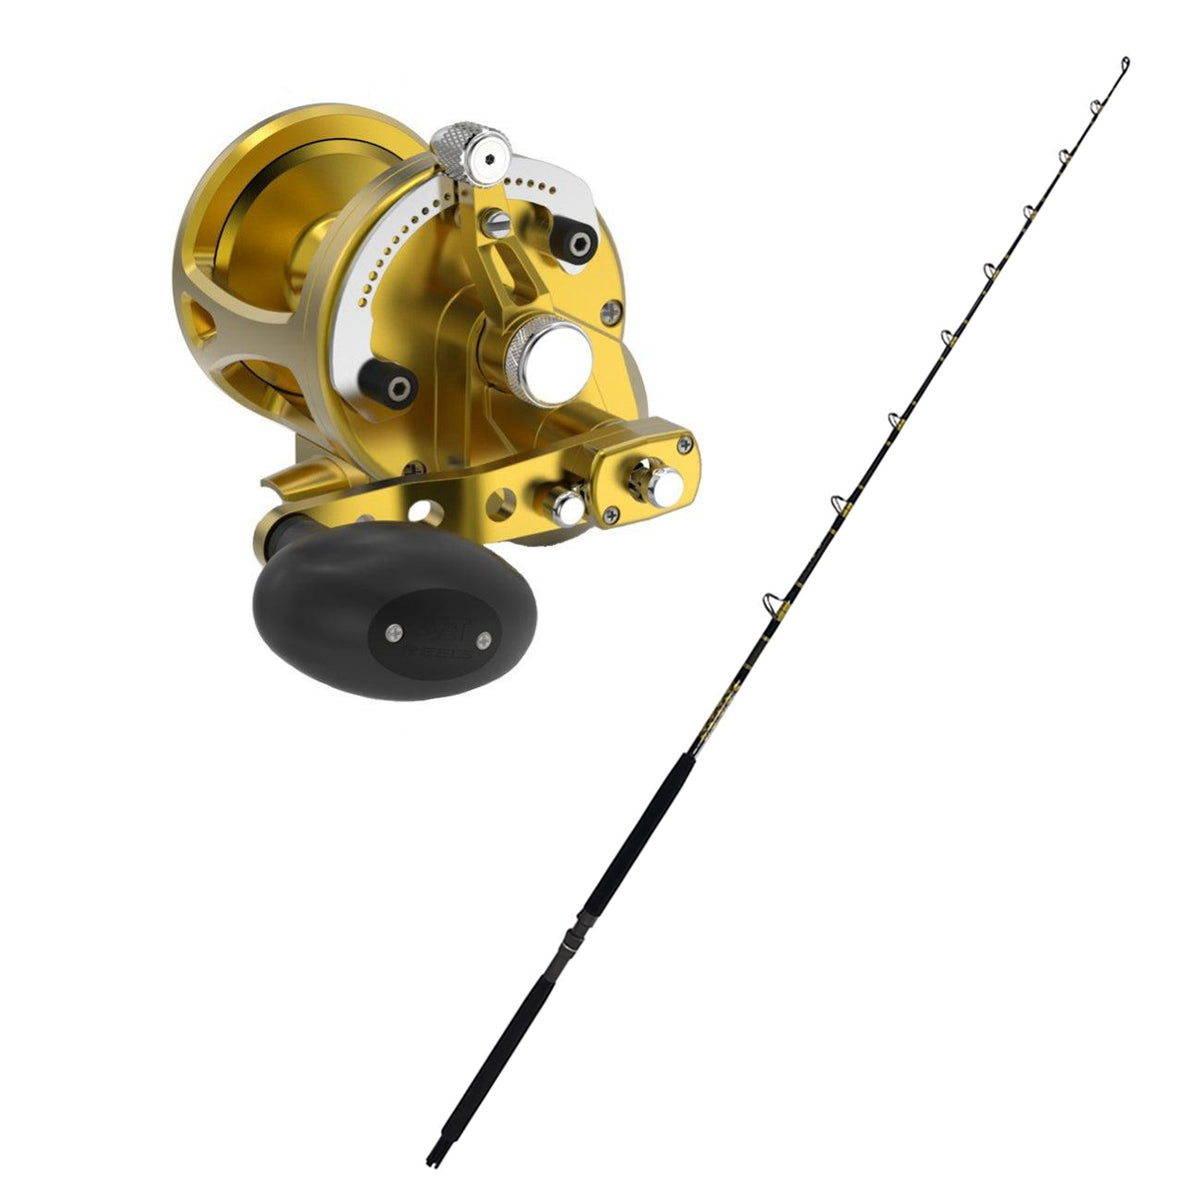 CHAOS KC 15-30 Rod with AVET LX 6/3 G2 Lever Drag Casting Reel Combo